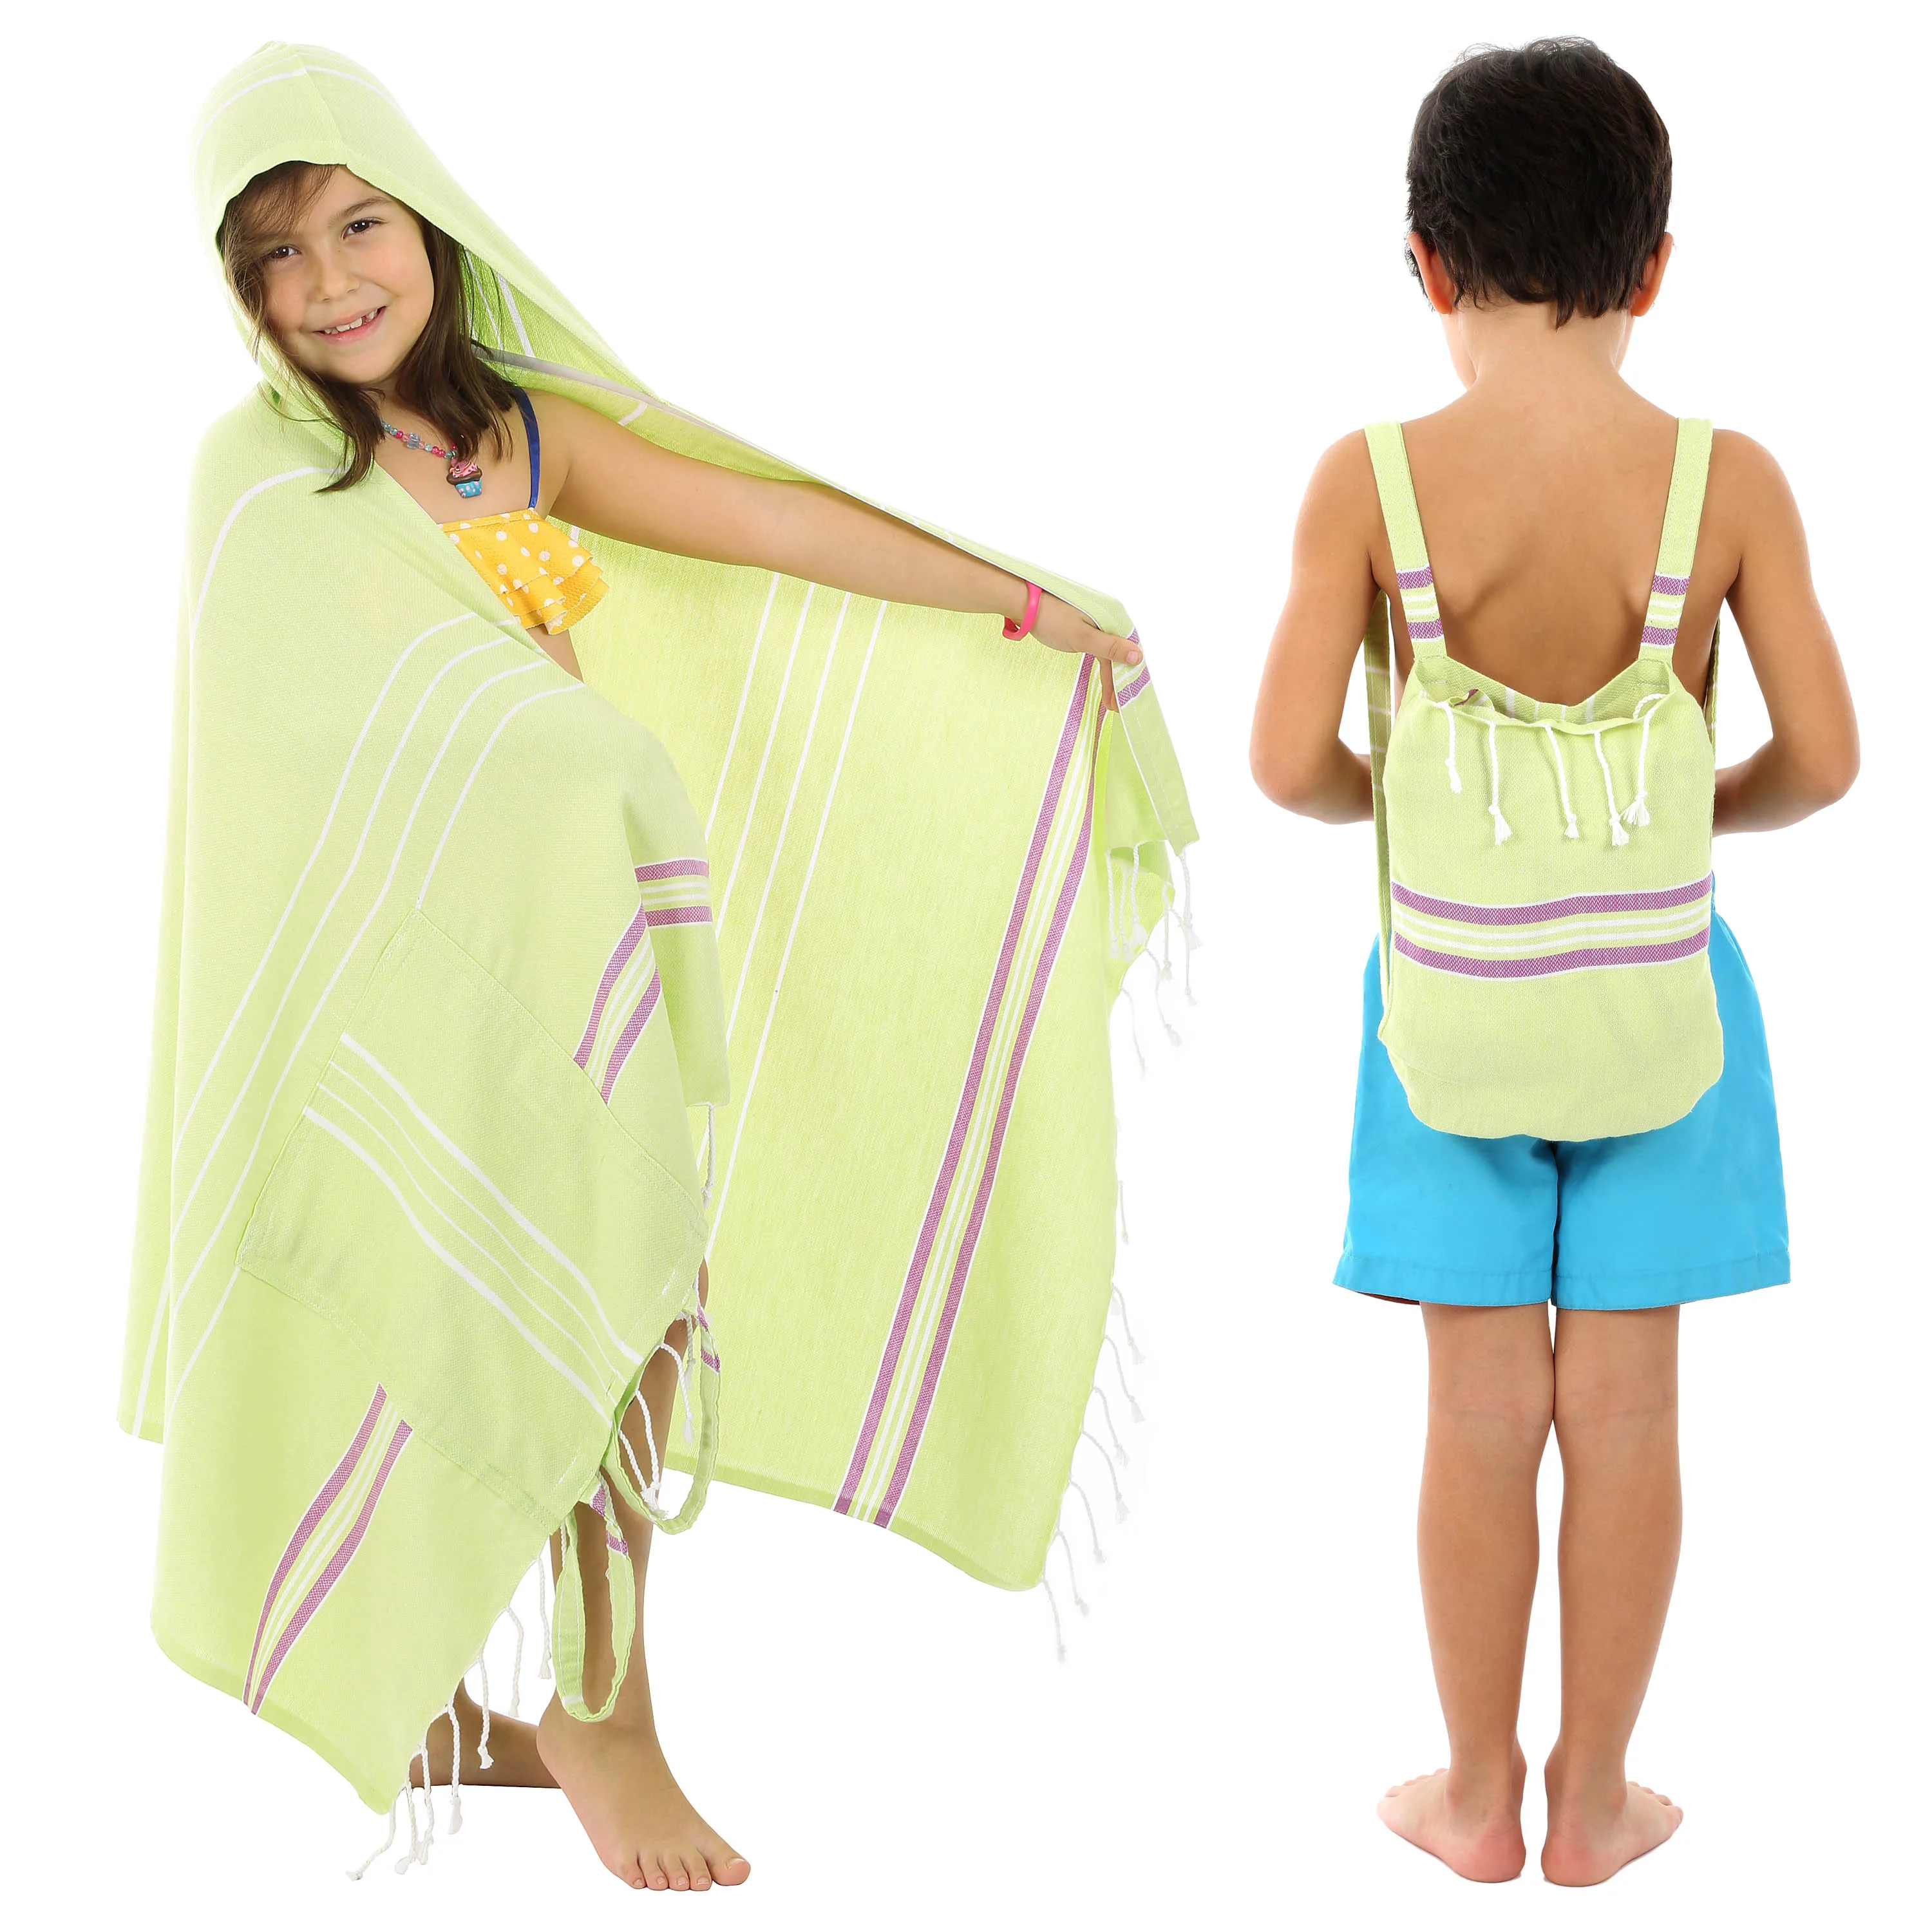 

CACALA 3-in-1 Peshtemal Turkish Bath Towel,Backpack&Poncho - %100 Cotton Absorbent&Quick Drying Beach Towel For Kids And Baby